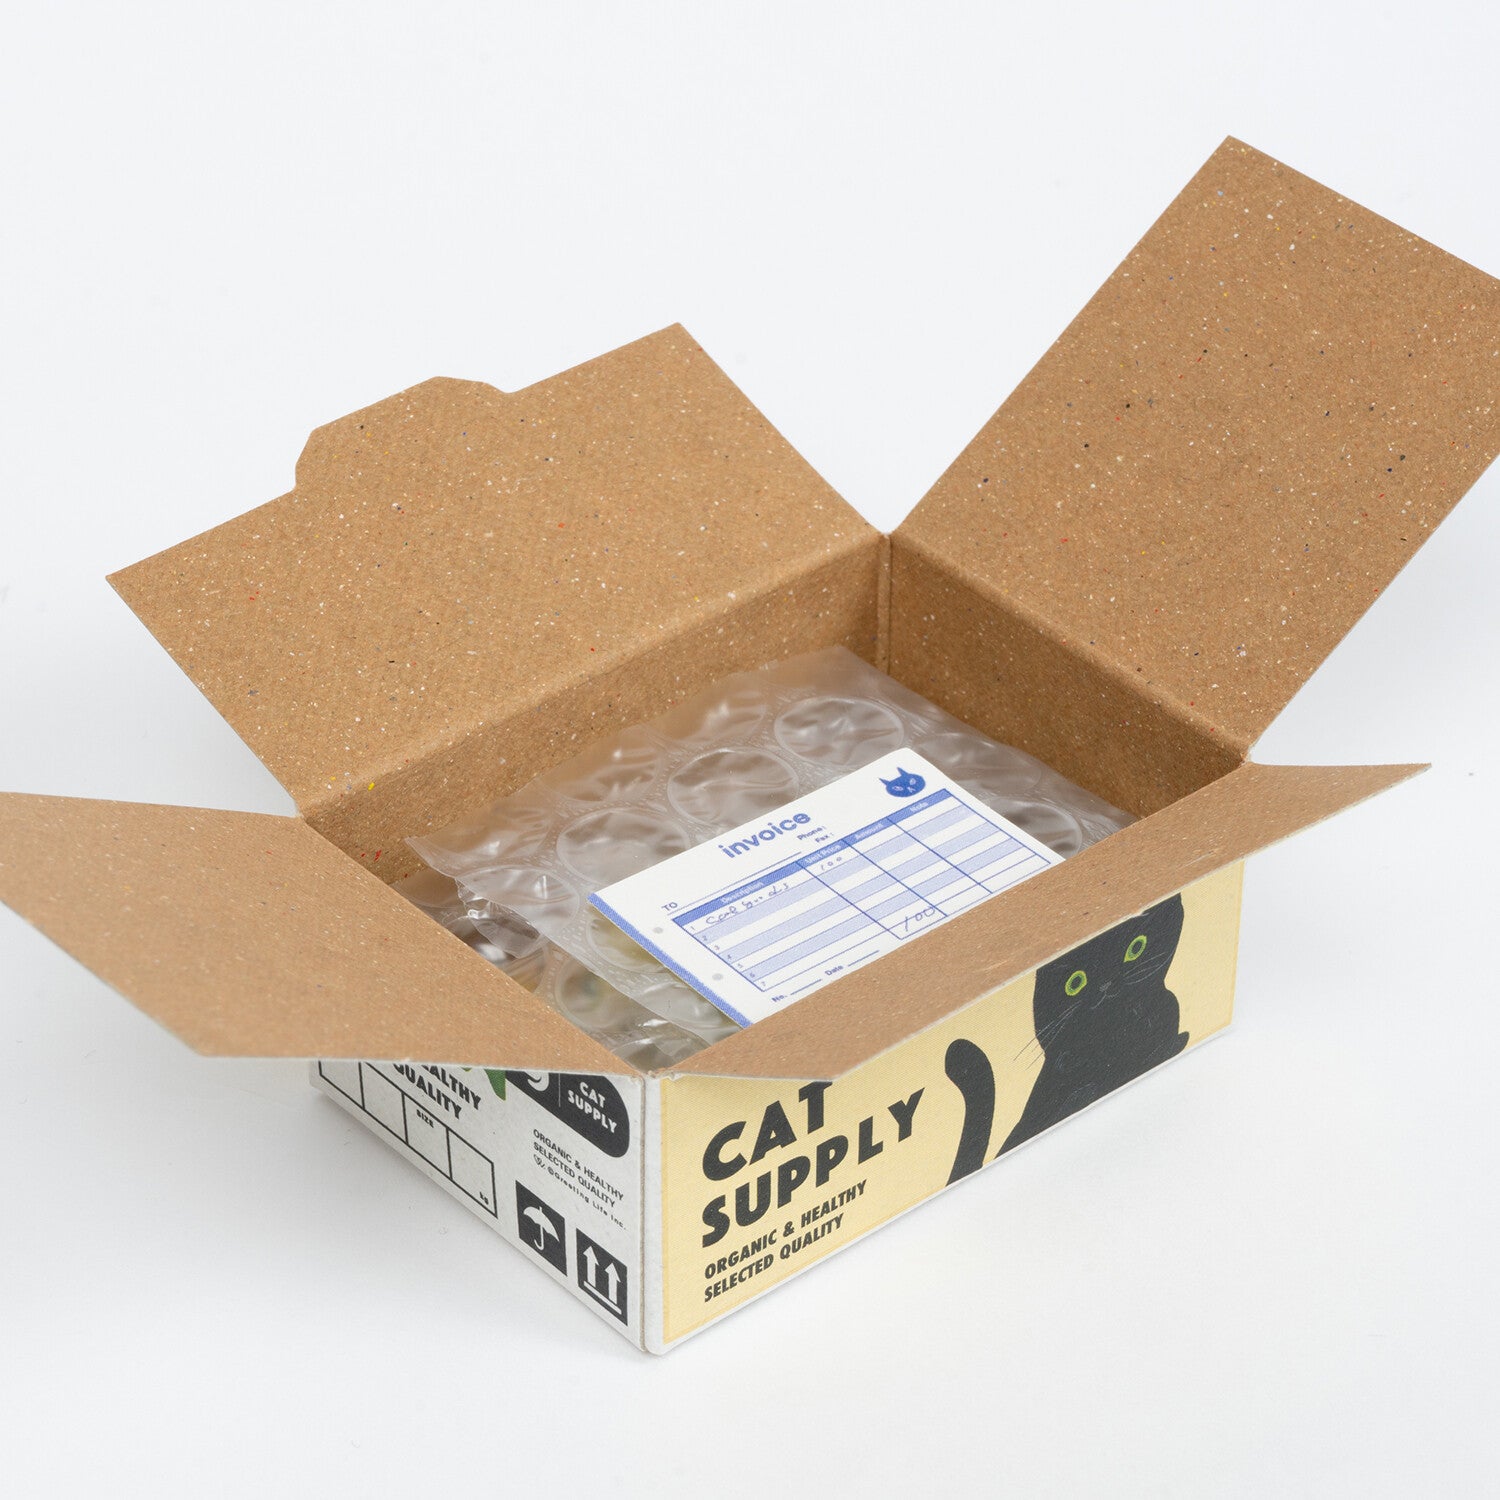 Cat Supply | Small Box of Flake Stickers | Haco Seal